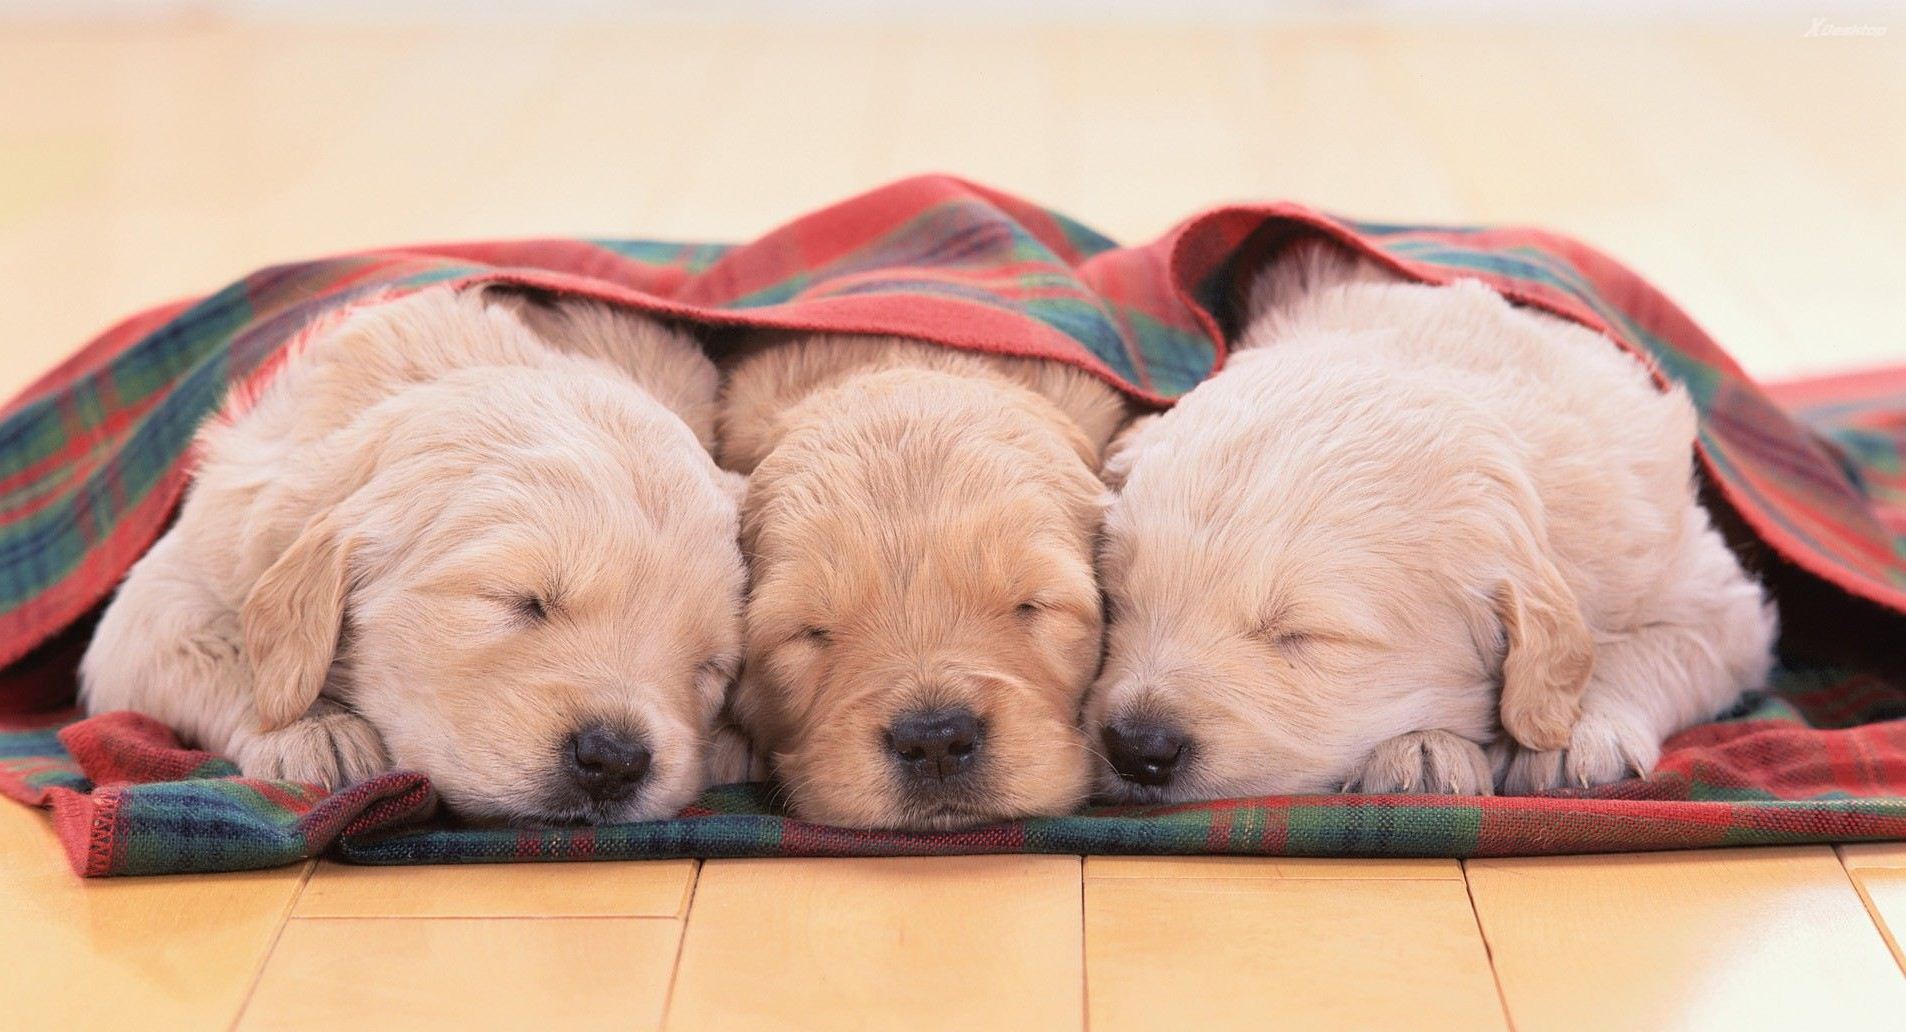 sleeping puppies and kittens